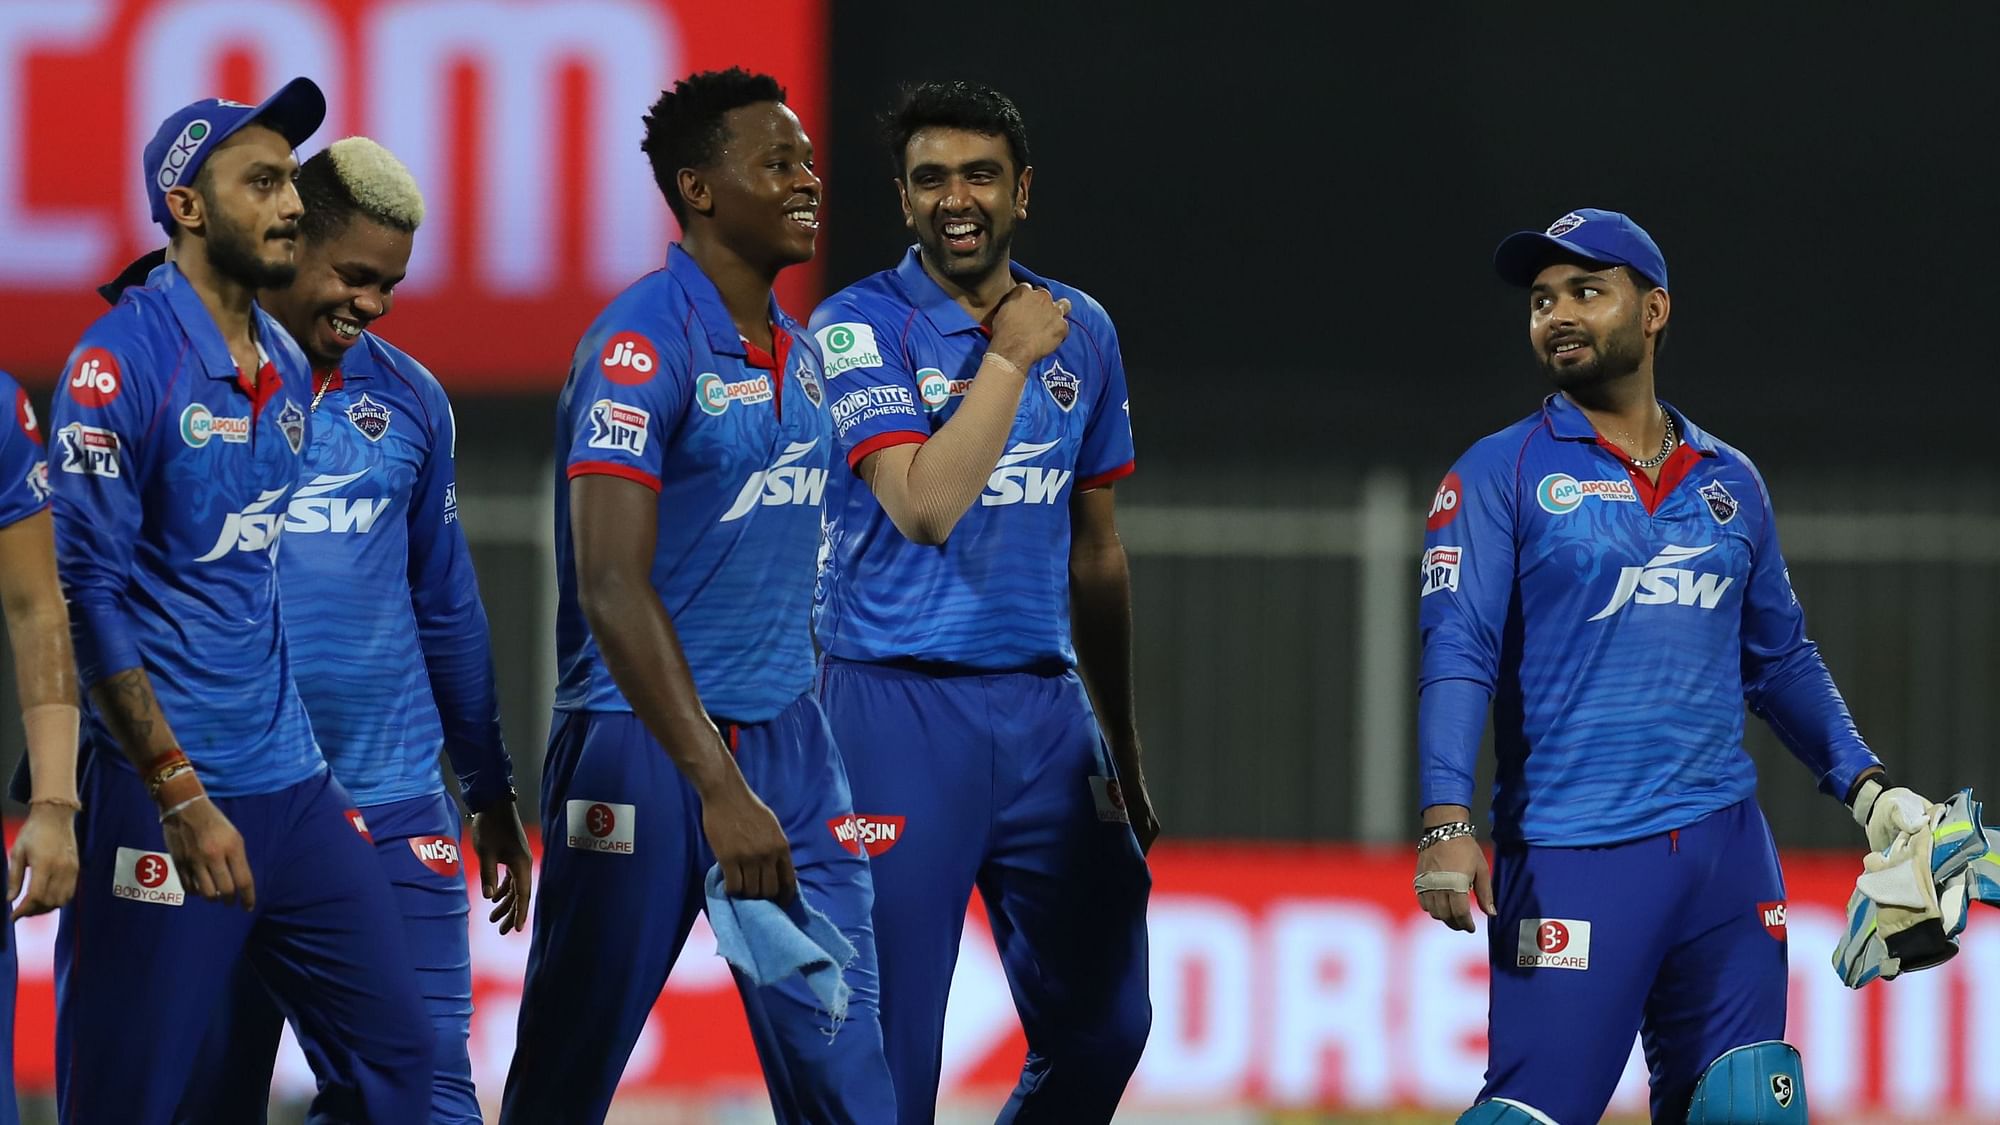 Delhi Capitals defeated Rajasthan Royals by 46 runs in the Indian Premier League on Friday.